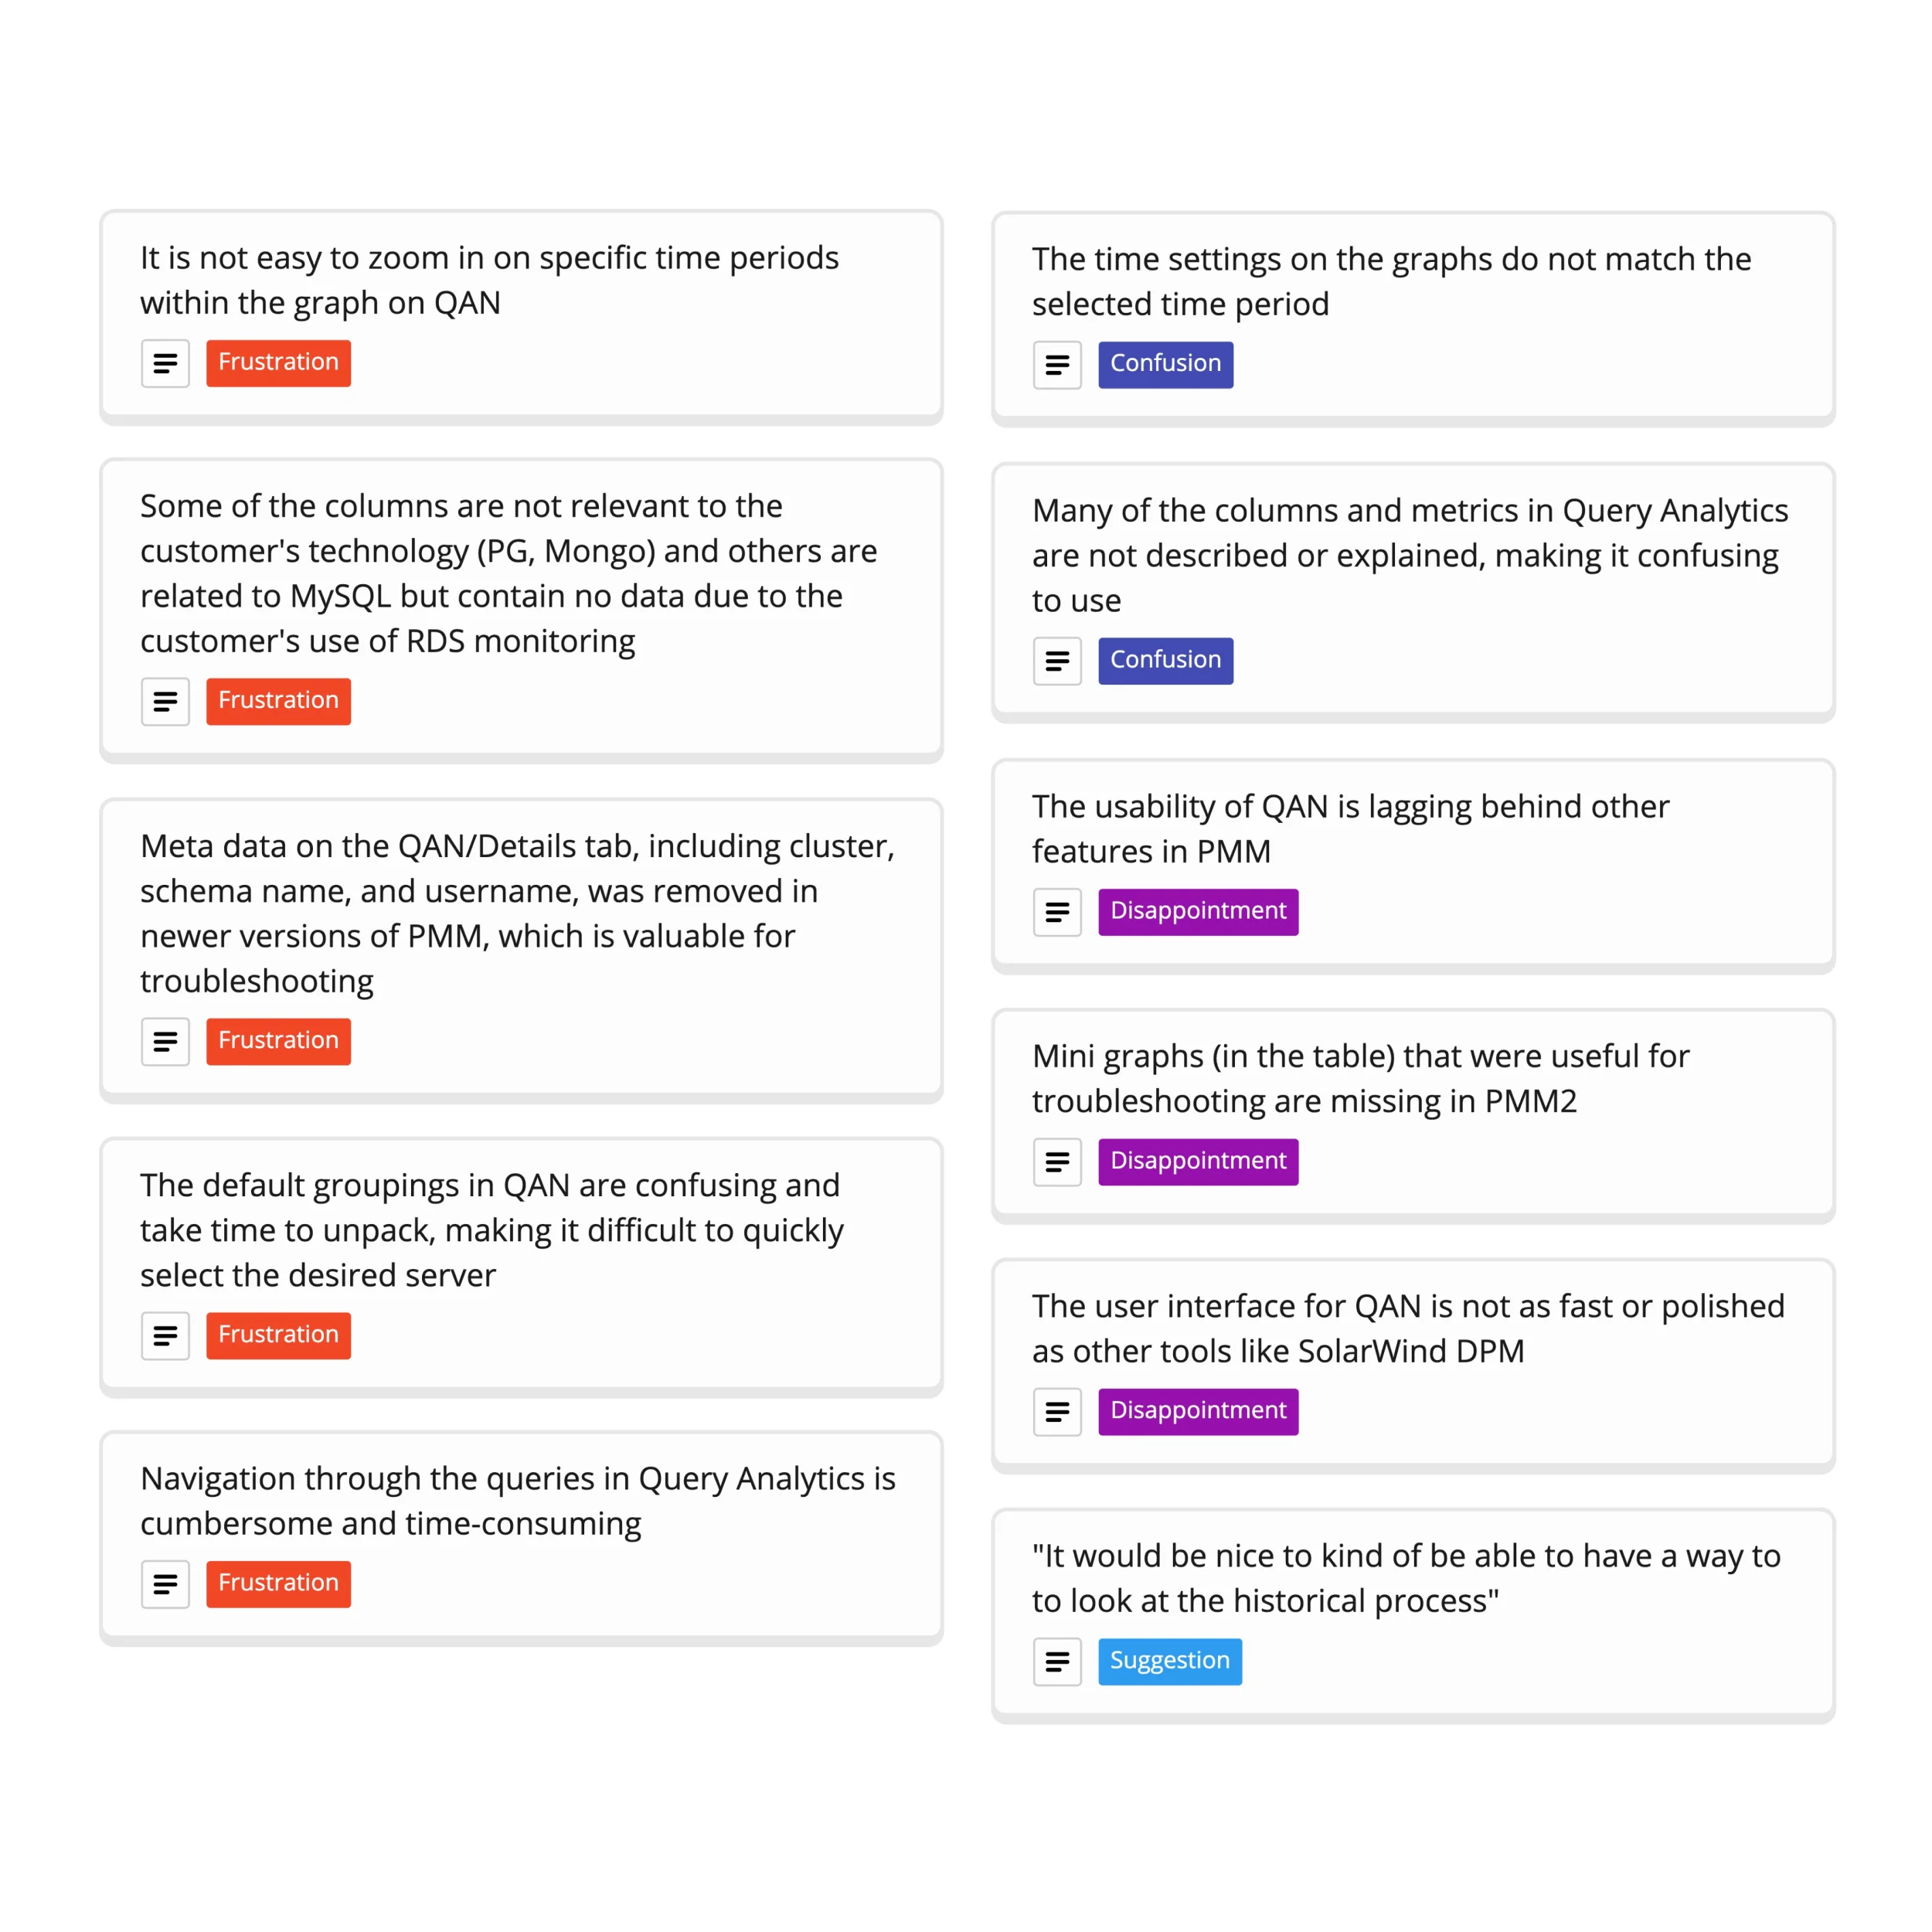 Listing of insights collected from user interviews categorized by sentiment.